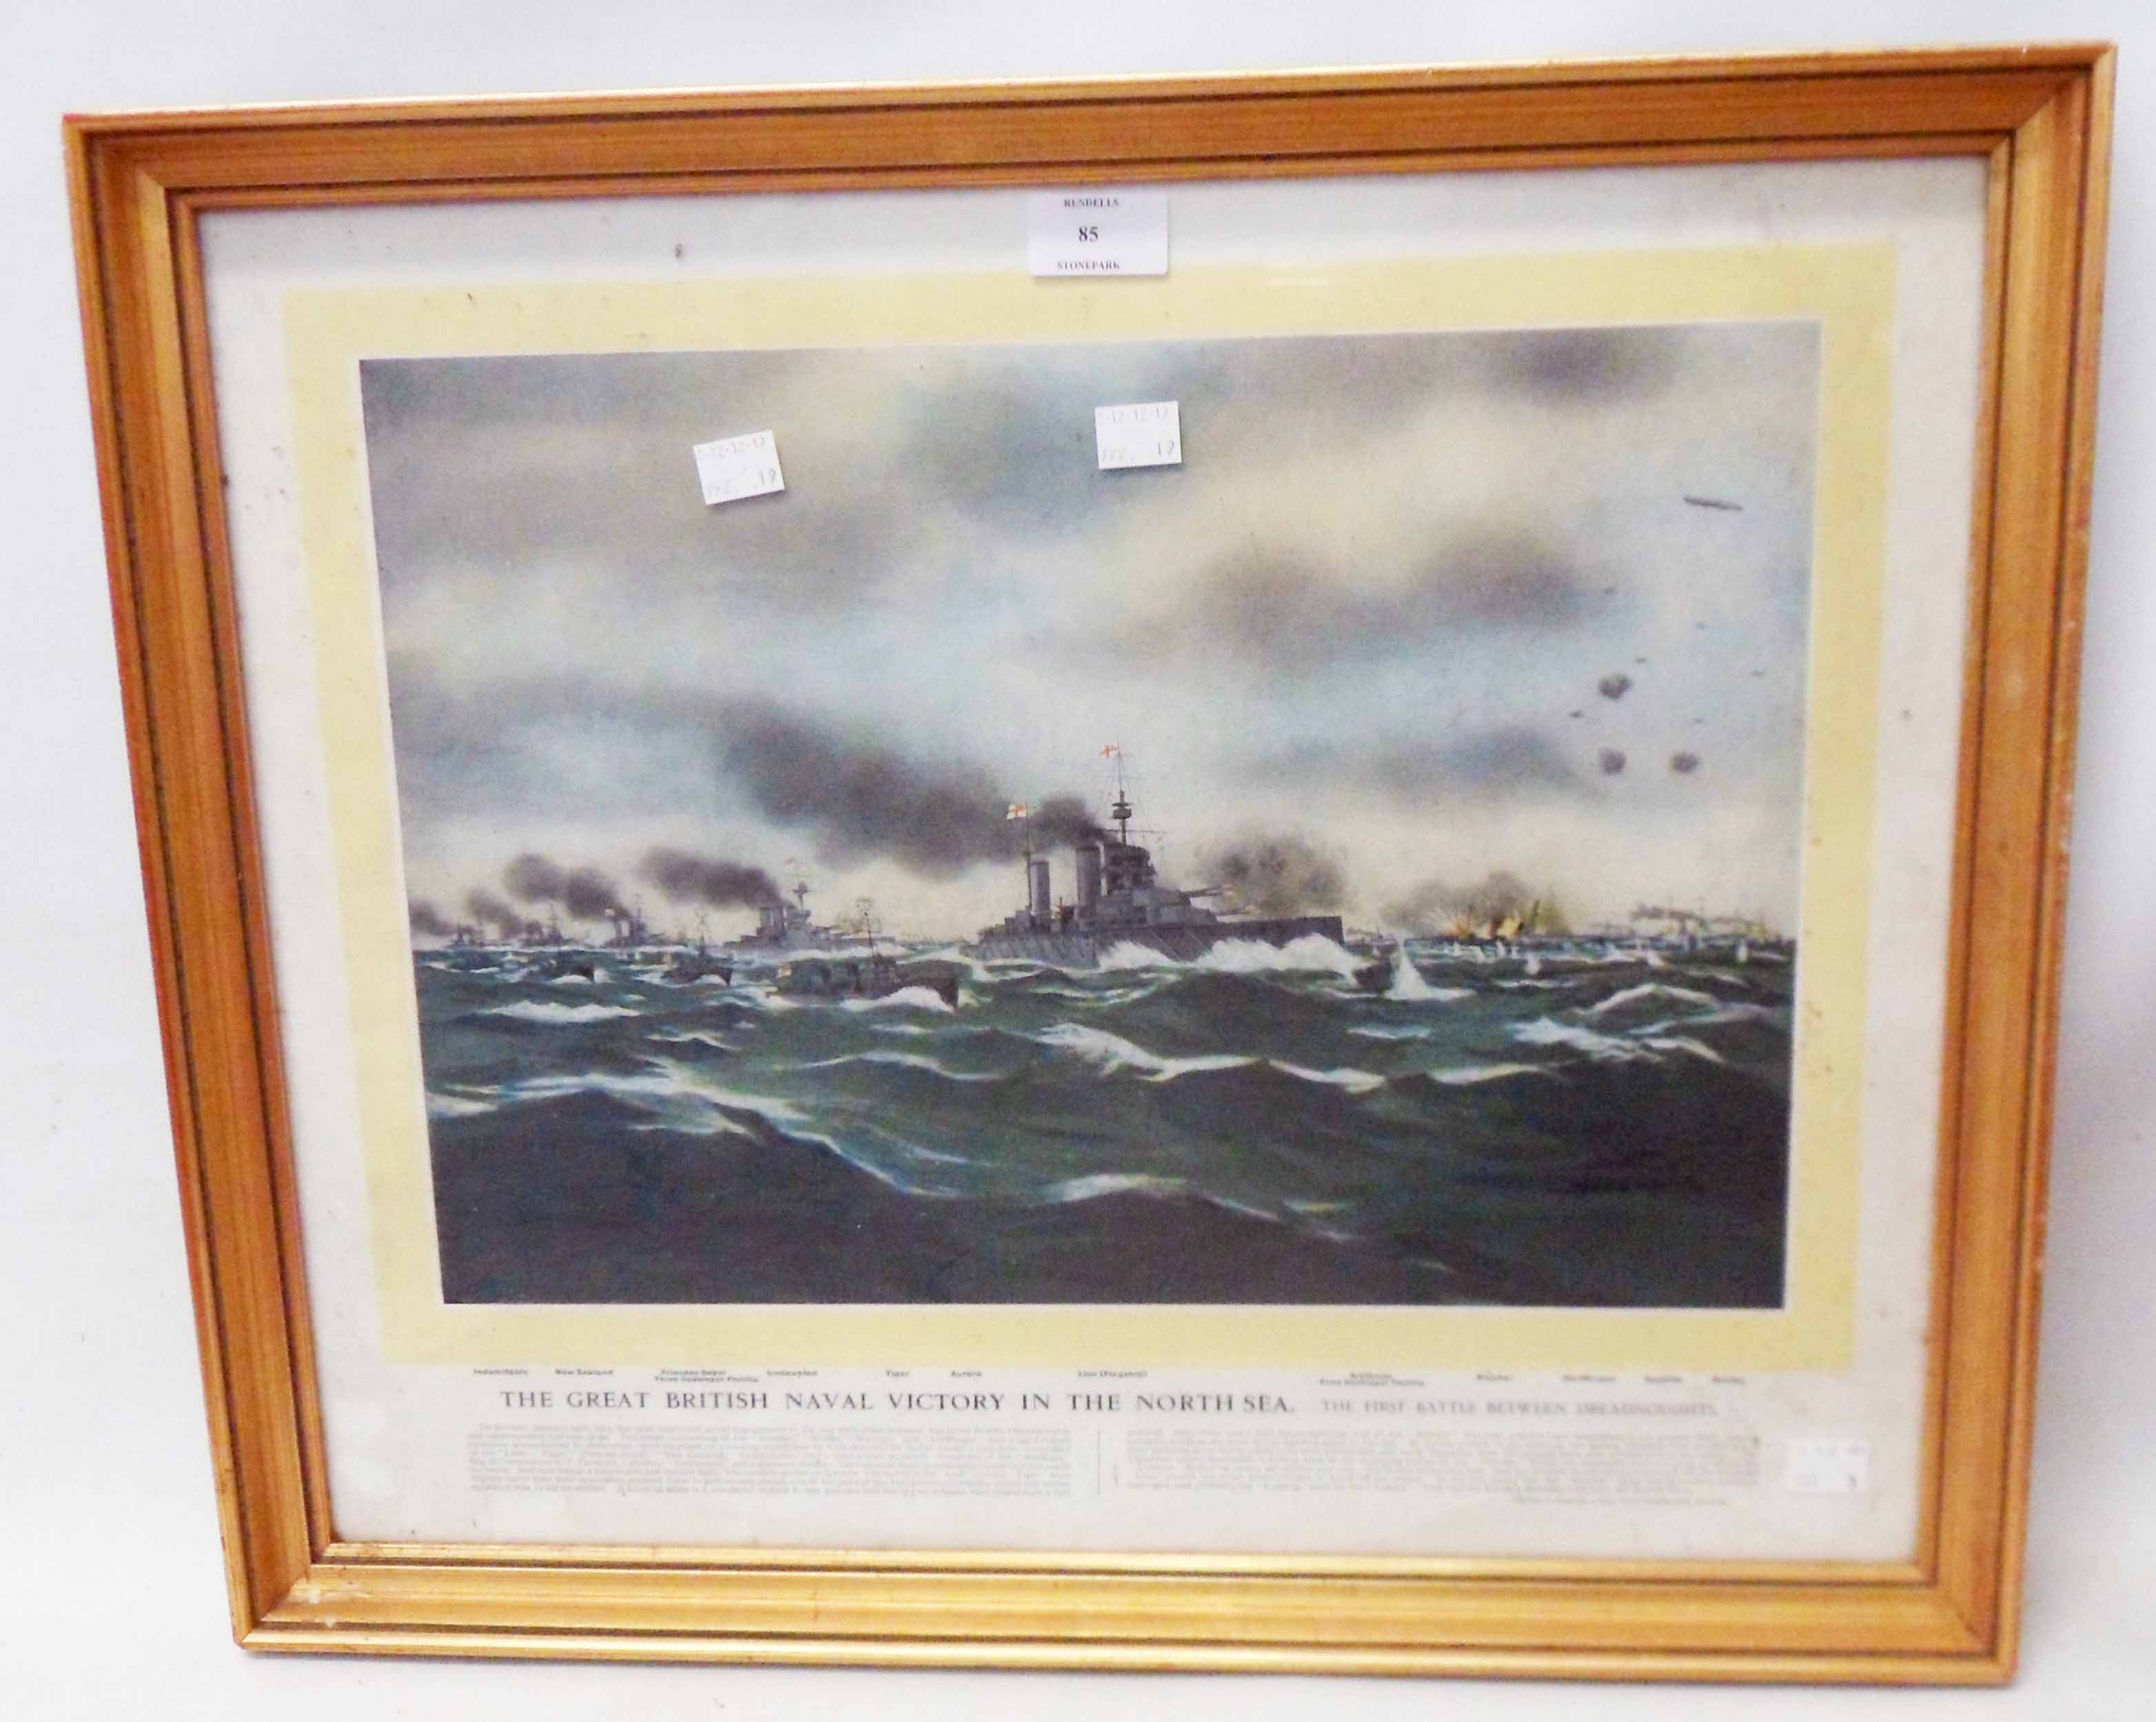 A framed print, entitled The Great British Naval Victory in the North Sea